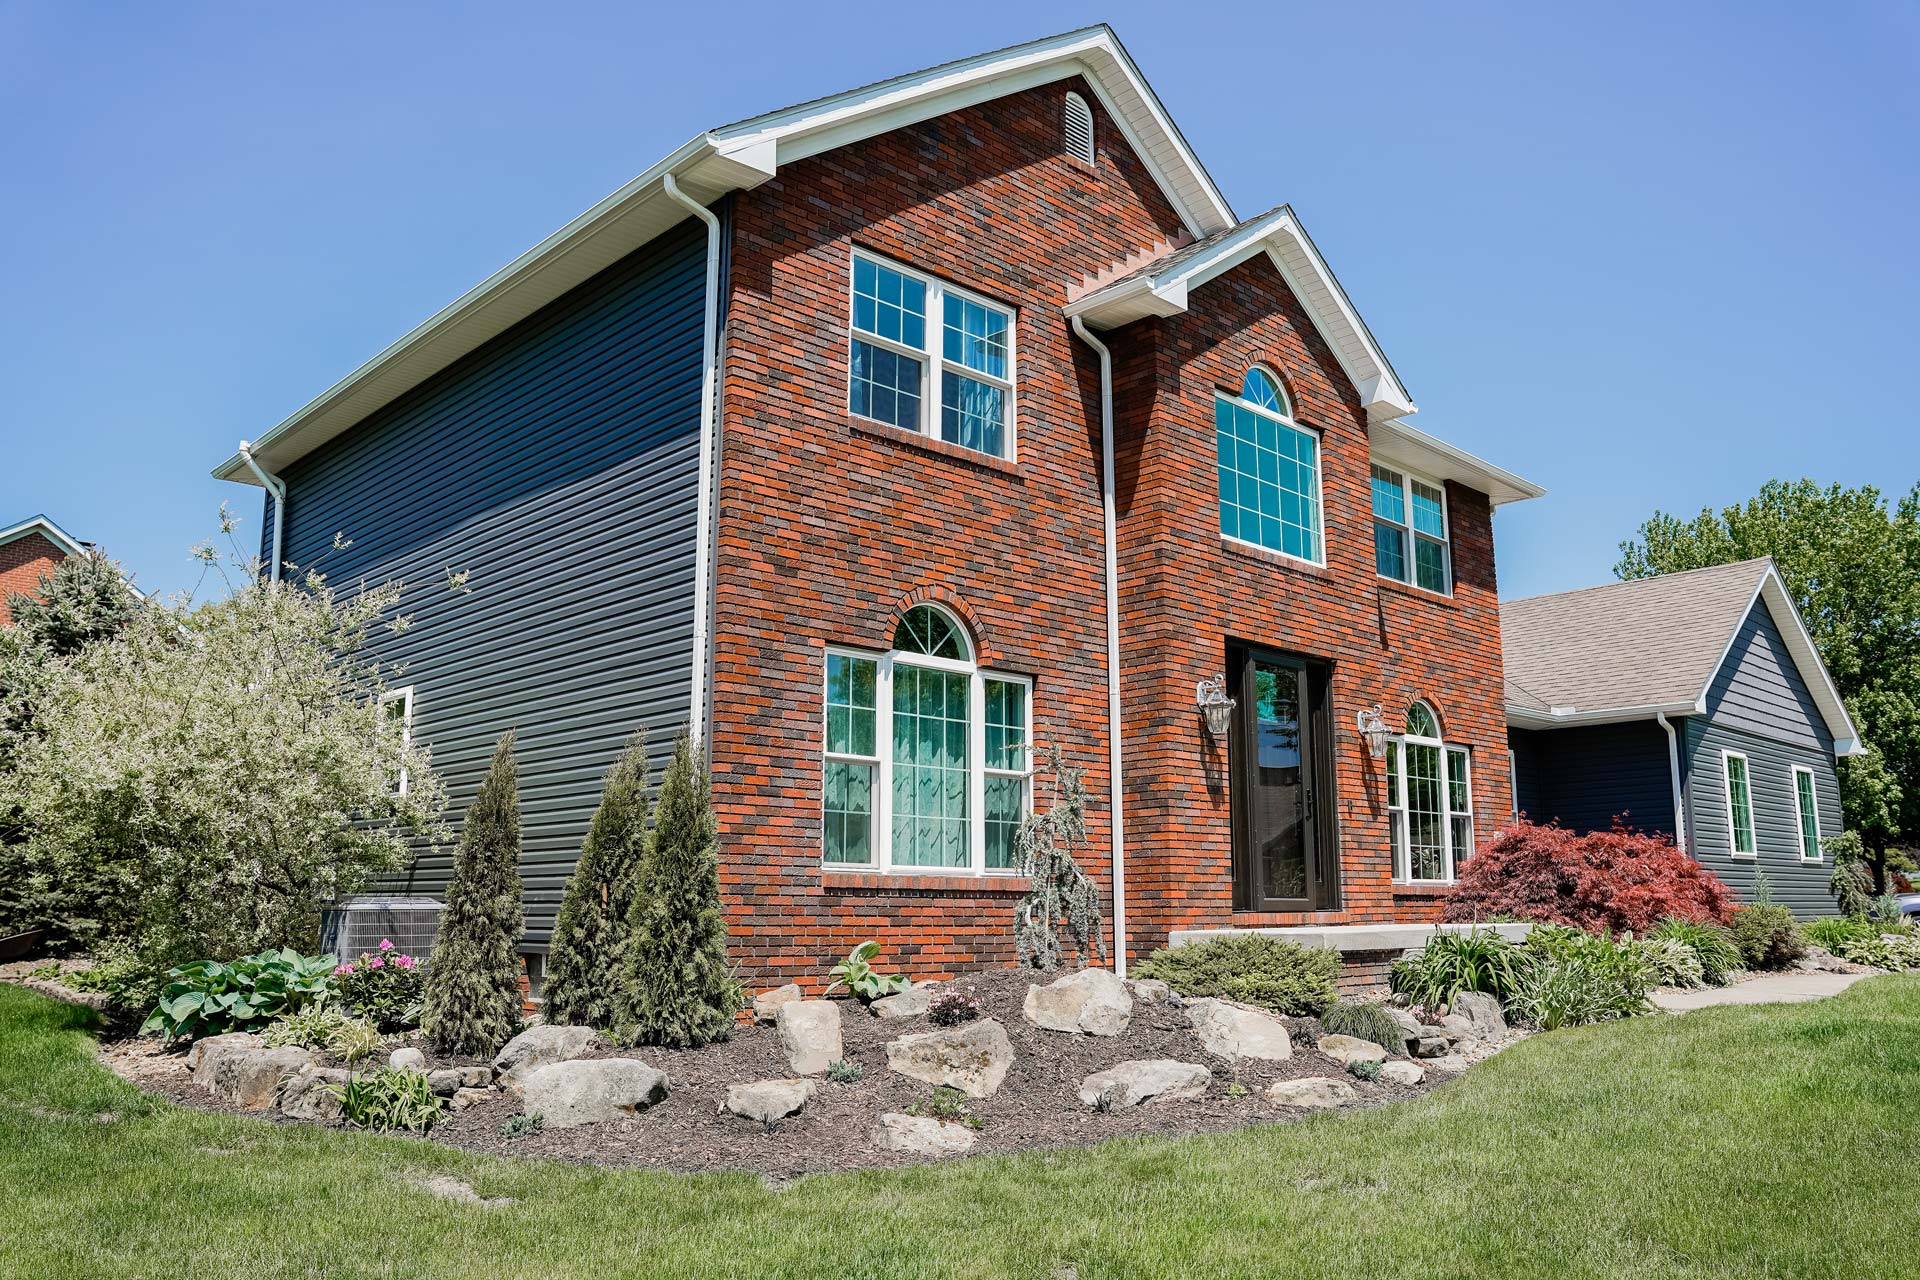 Brick two-story home with HeartTech® Vinyl Siding in Sea Slate and Endure™ Windows in White